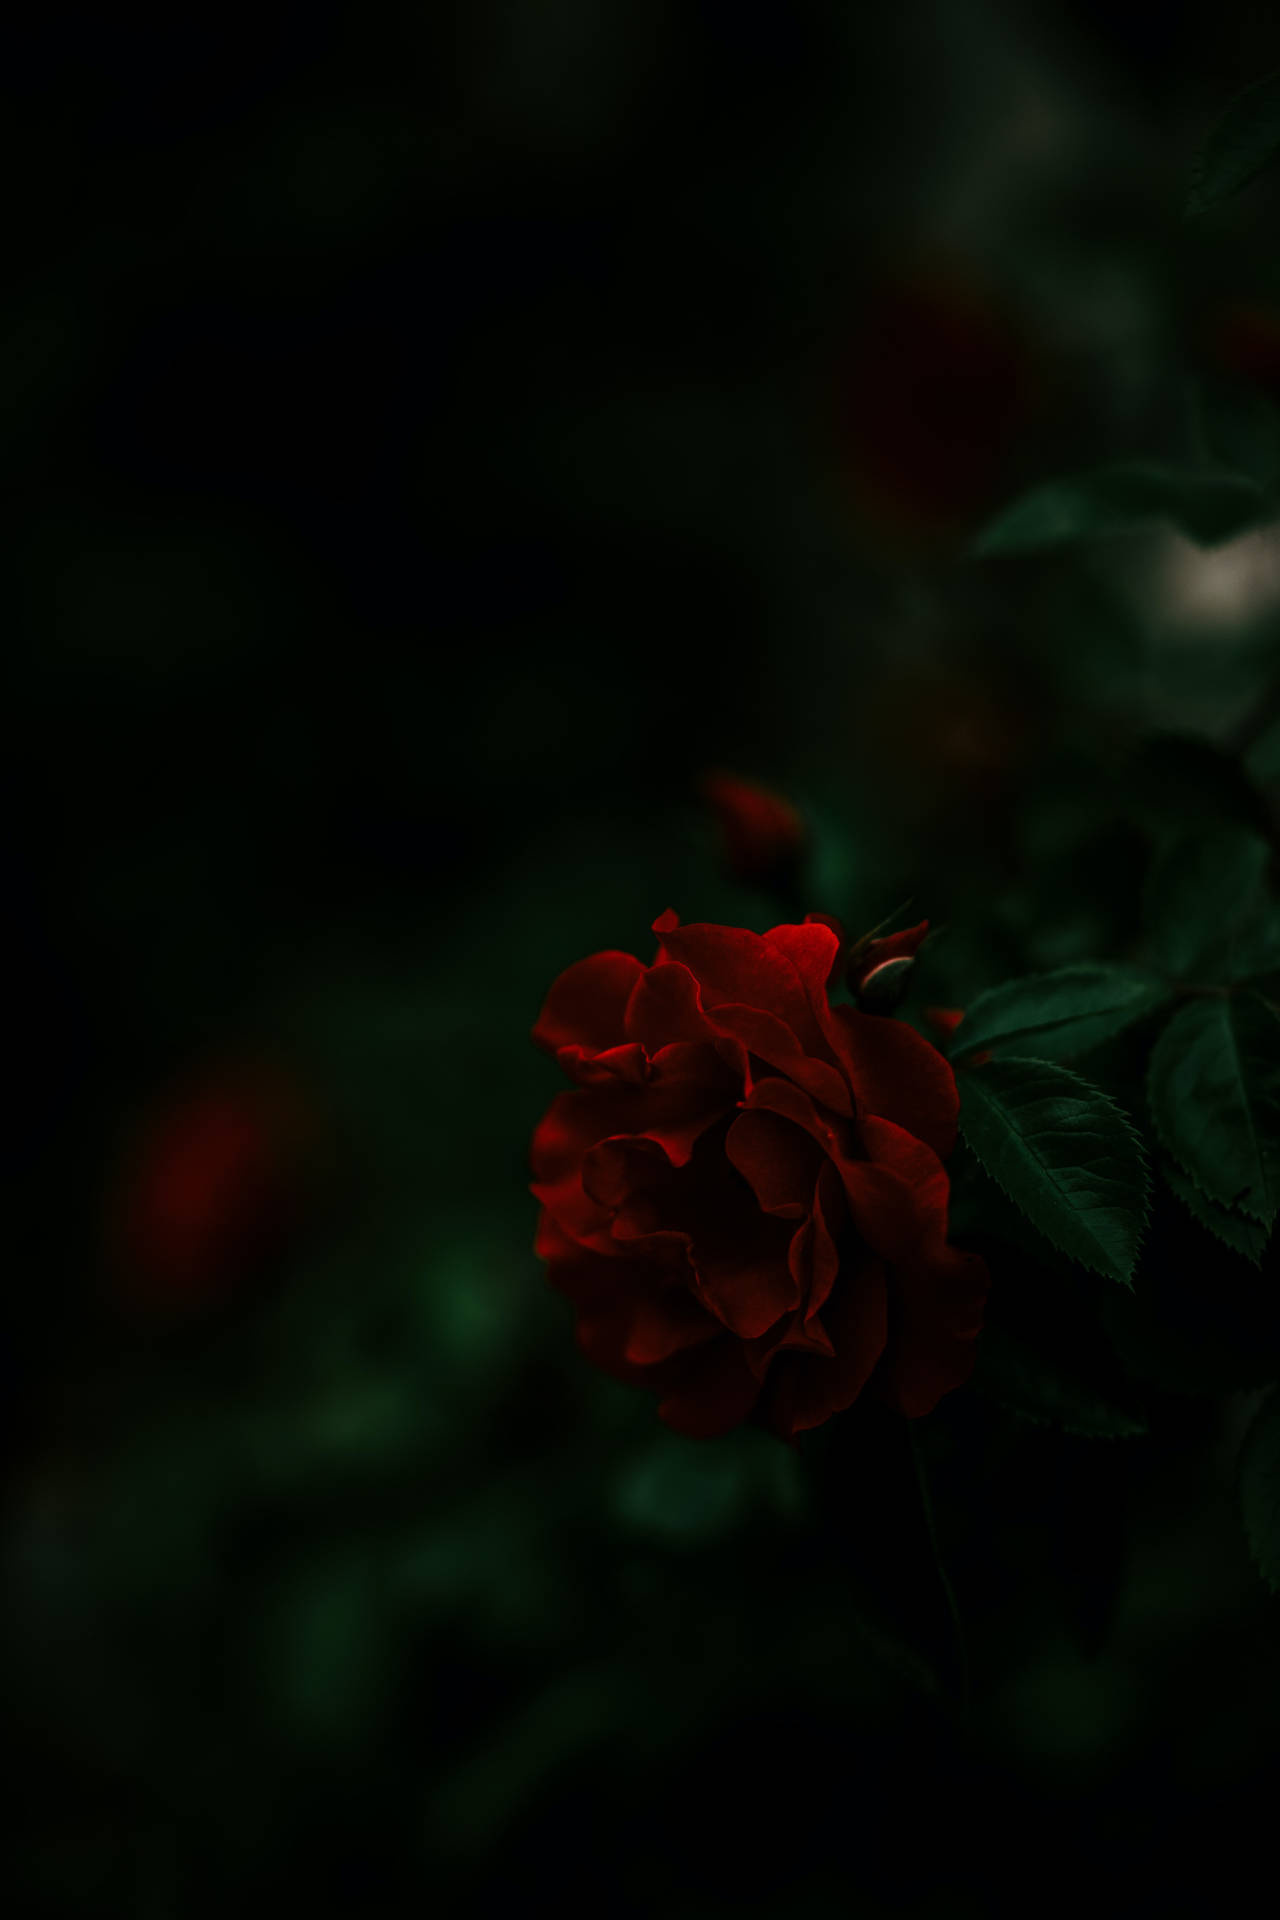 Dark Aesthetic 3648X5472 Wallpaper and Background Image